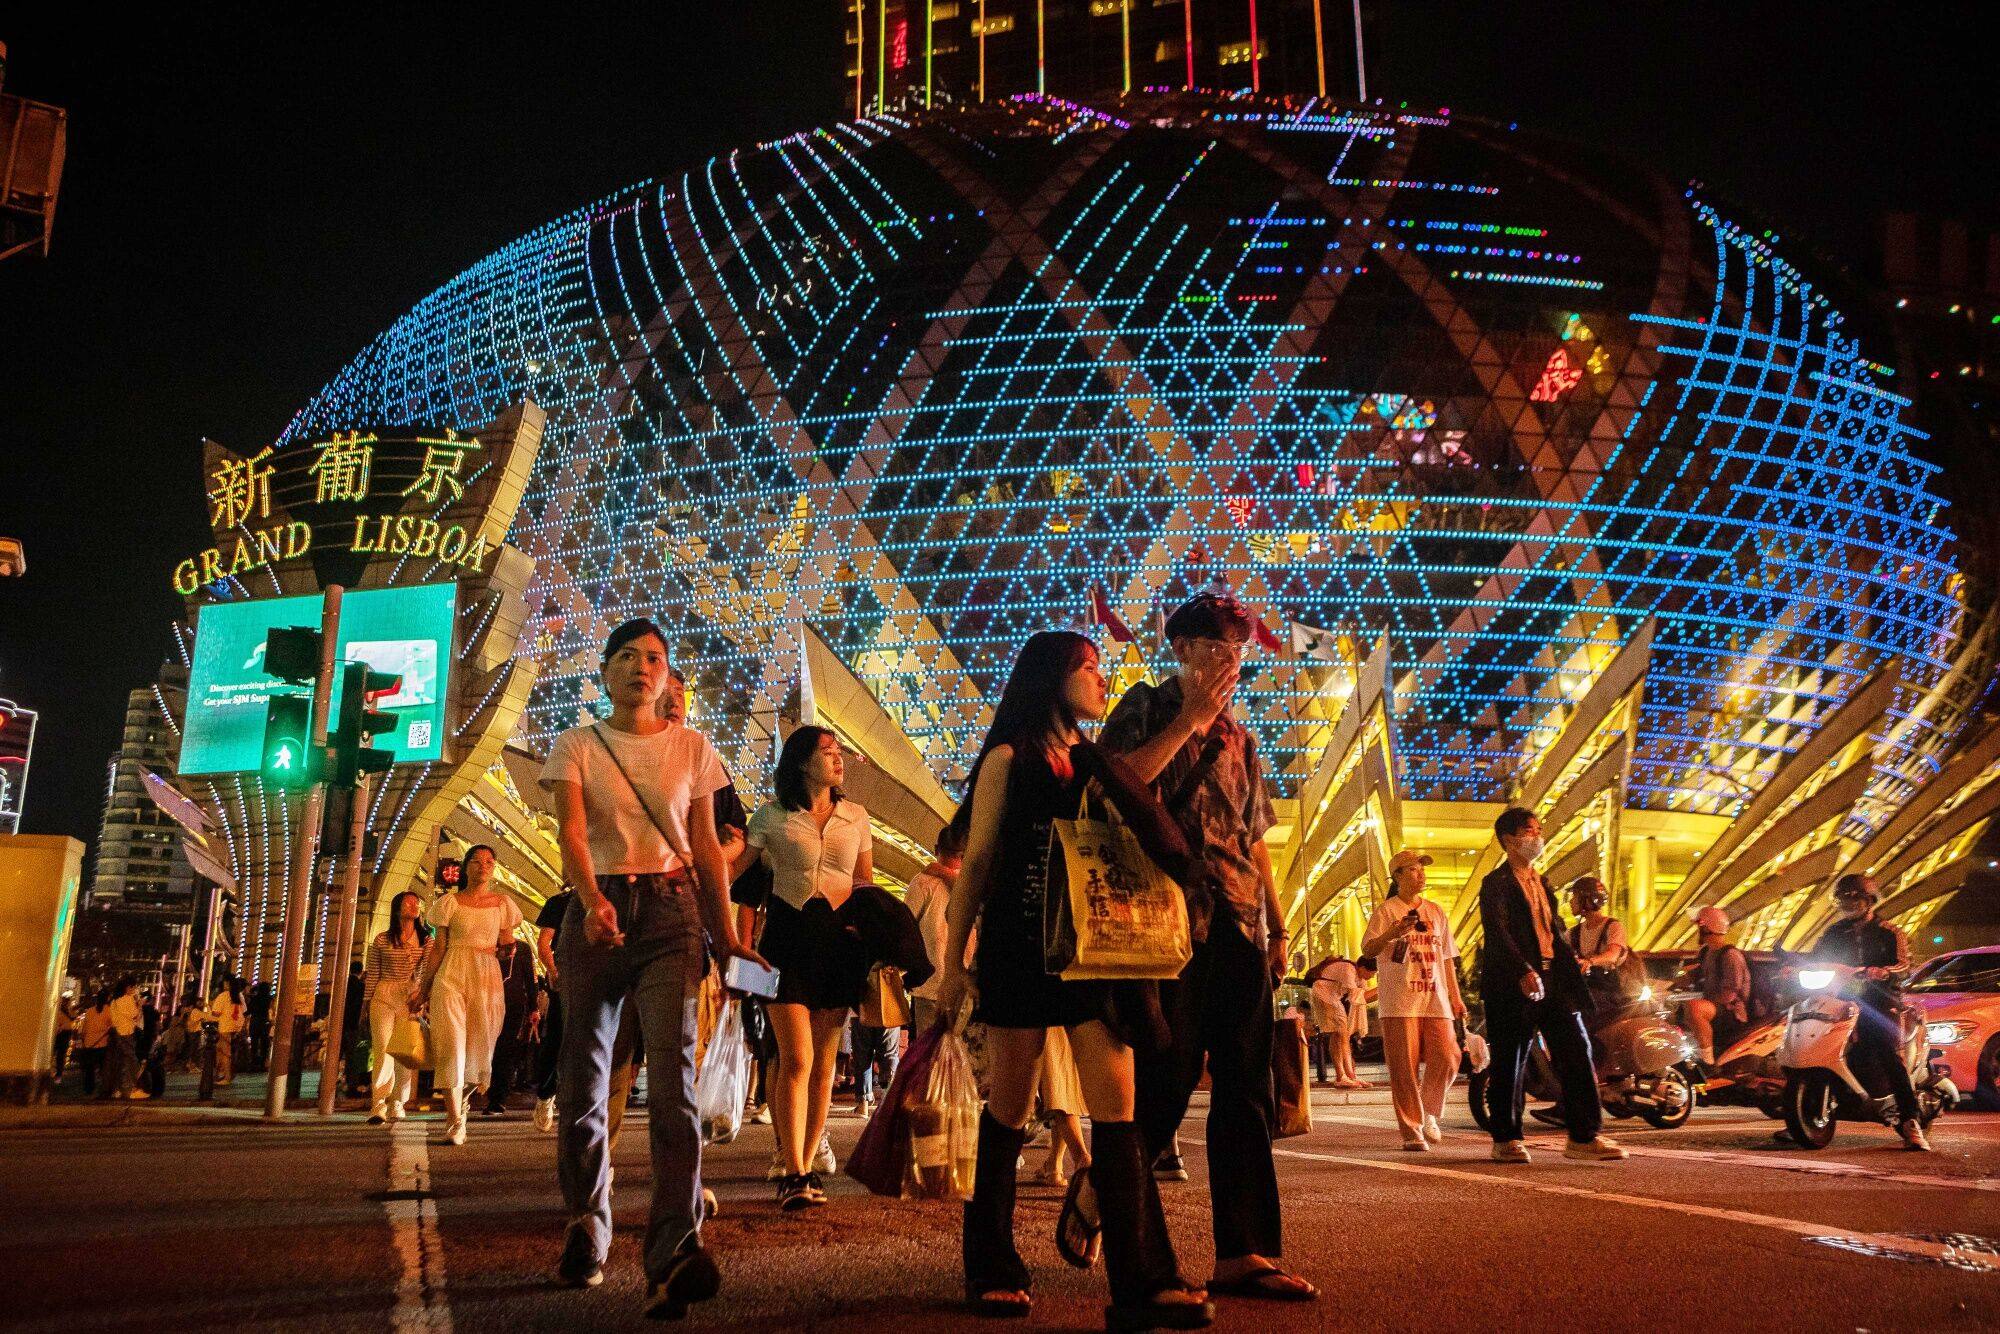 Visitors cross the street in front of the Grand Lisboa casino resort, operated by SJM Holdings Ltd., during Golden Week at night in Macau, China, on Sunday, April 30, 2023. Photo: Bloomberg